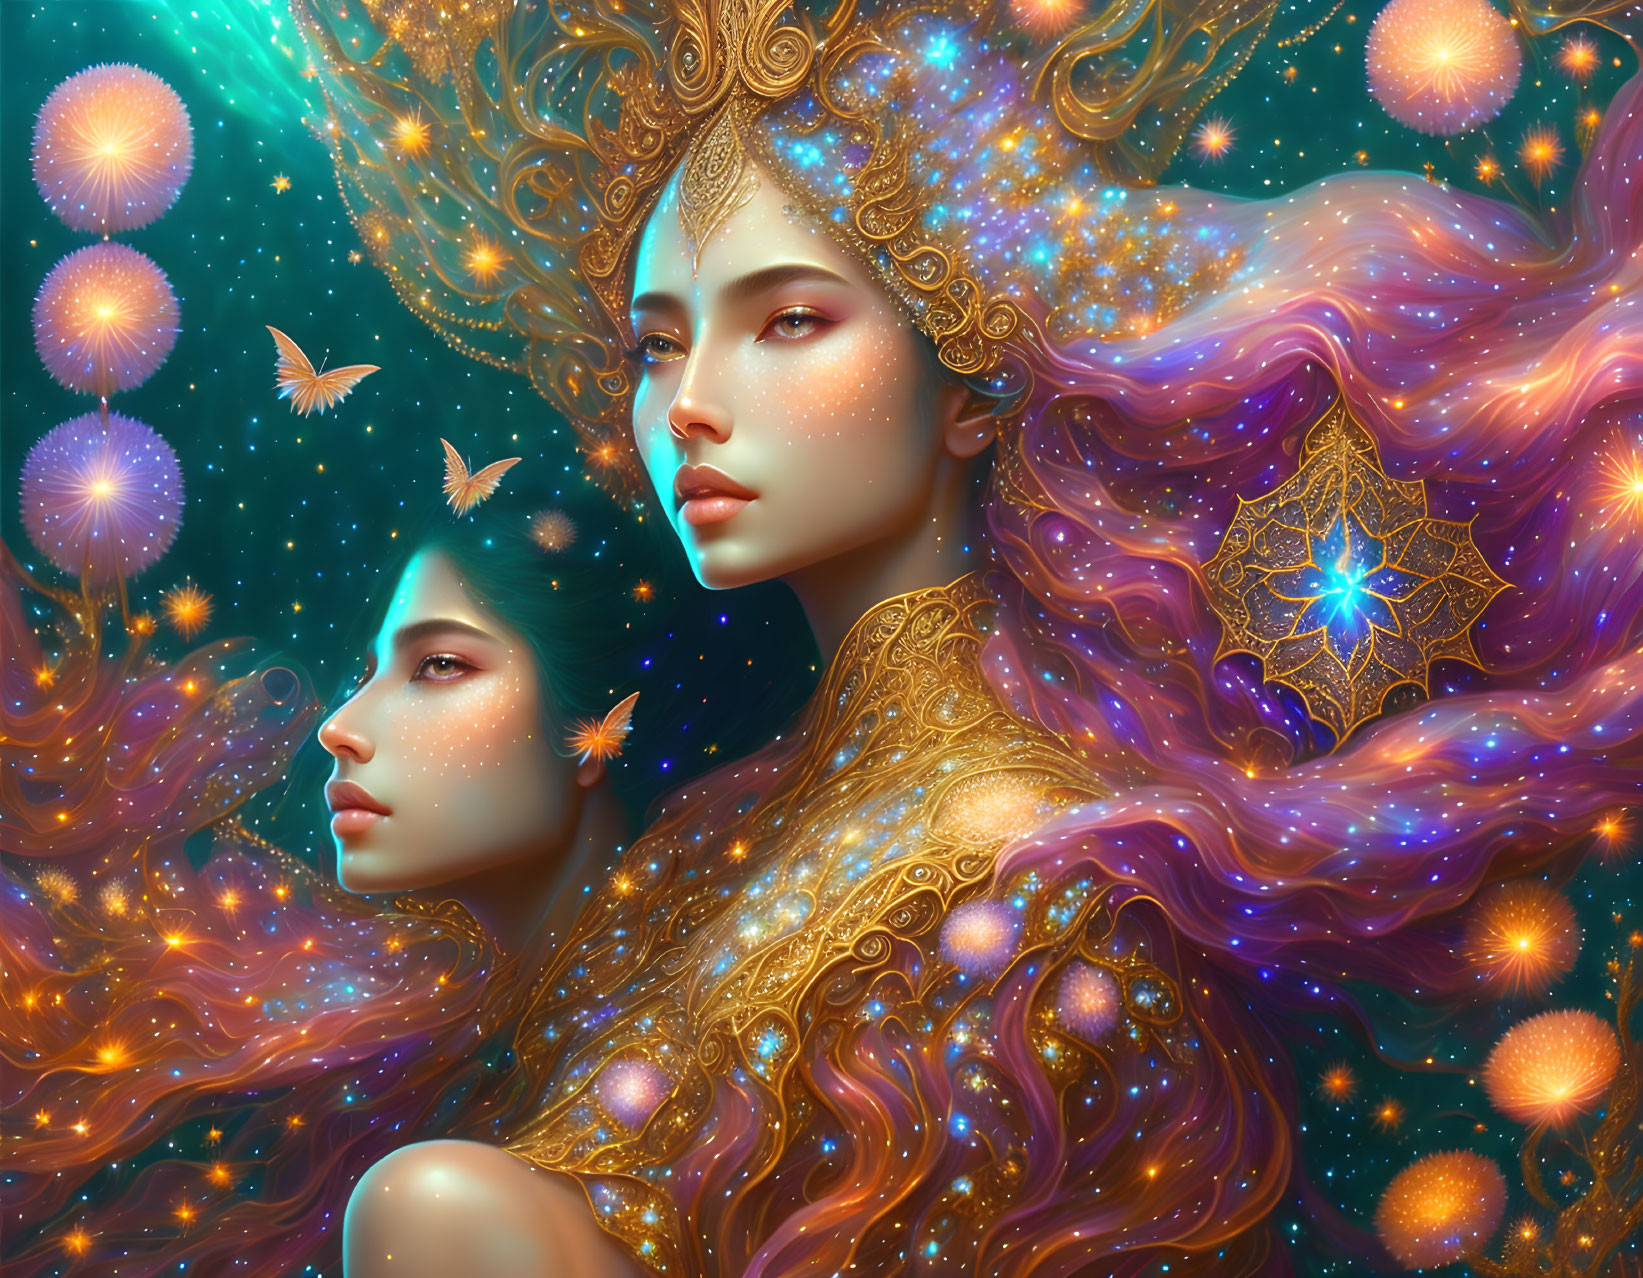 Fantastical image of ethereal beings with star-adorned hair among butterflies and cosmic motifs